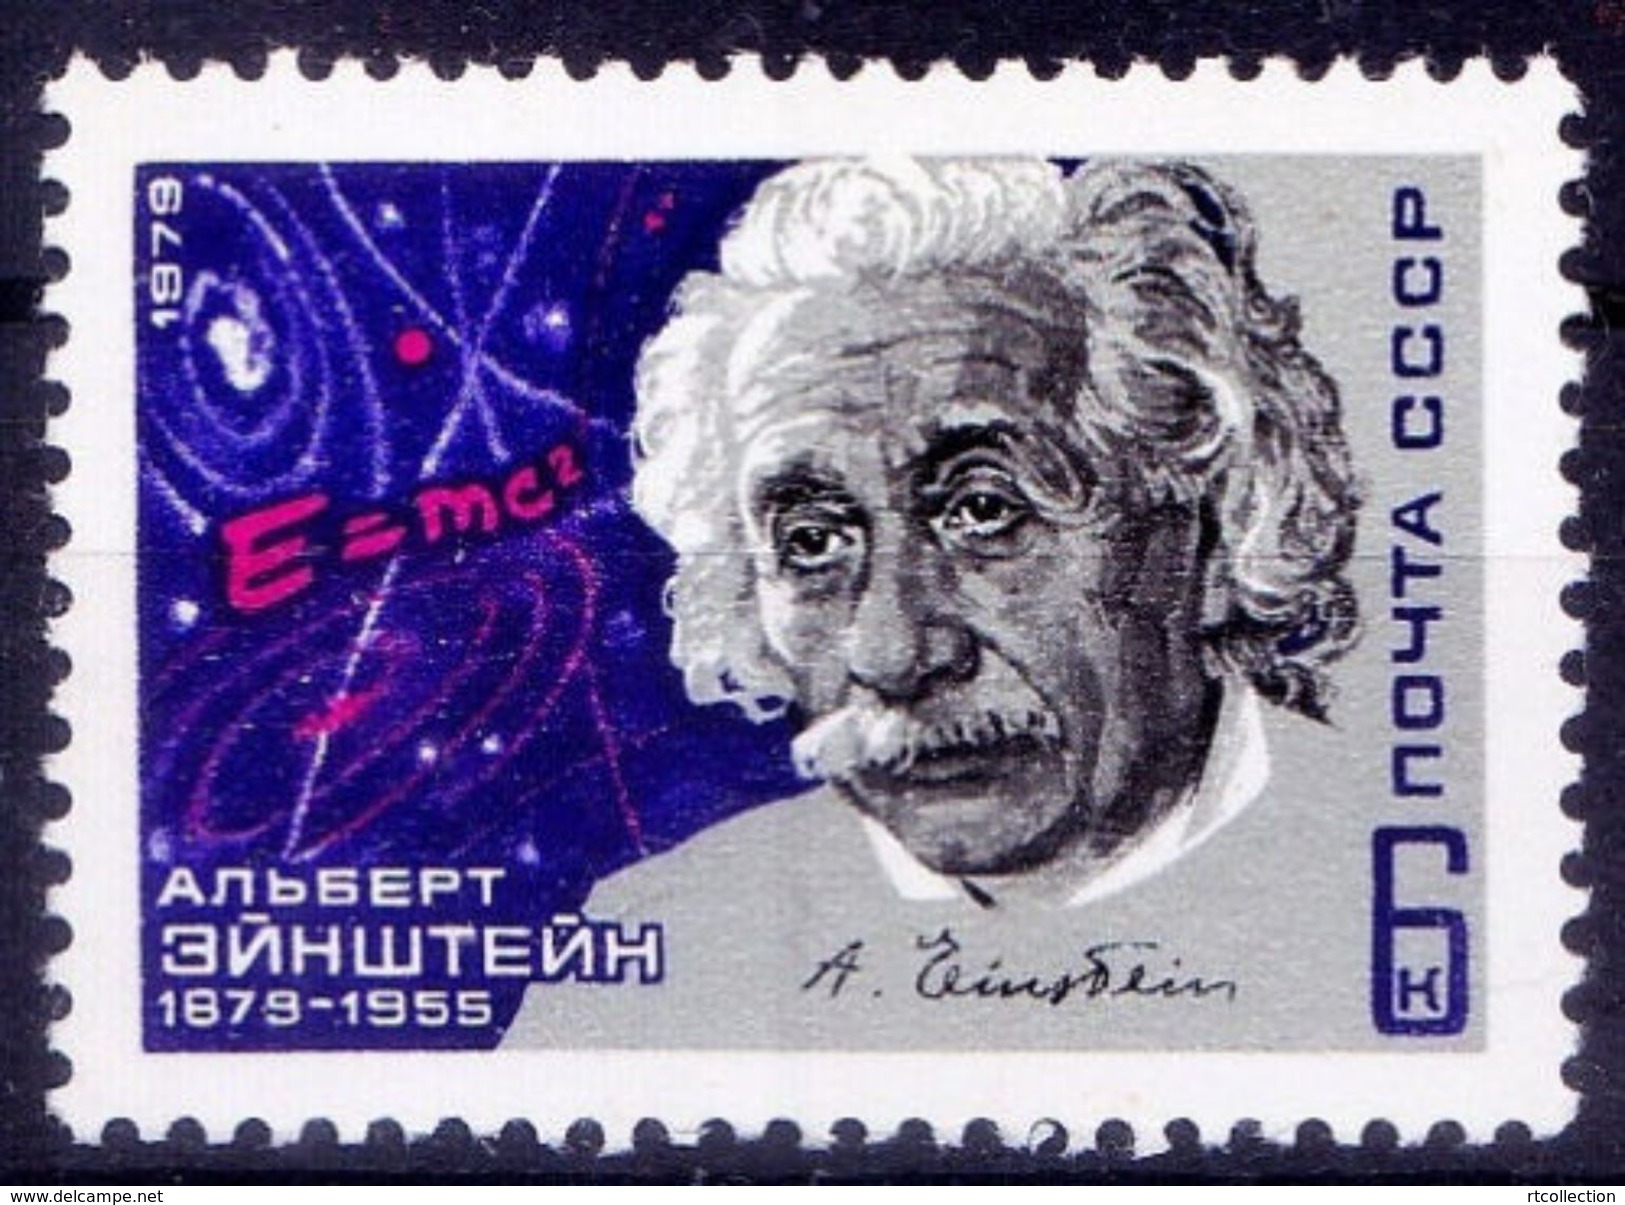 USSR Russia 1979 Famous People Albert Einstein Nobel Physics Physicist Sciences Soviet Stamp MNH Michel 4828 SG 4868 - Fisica